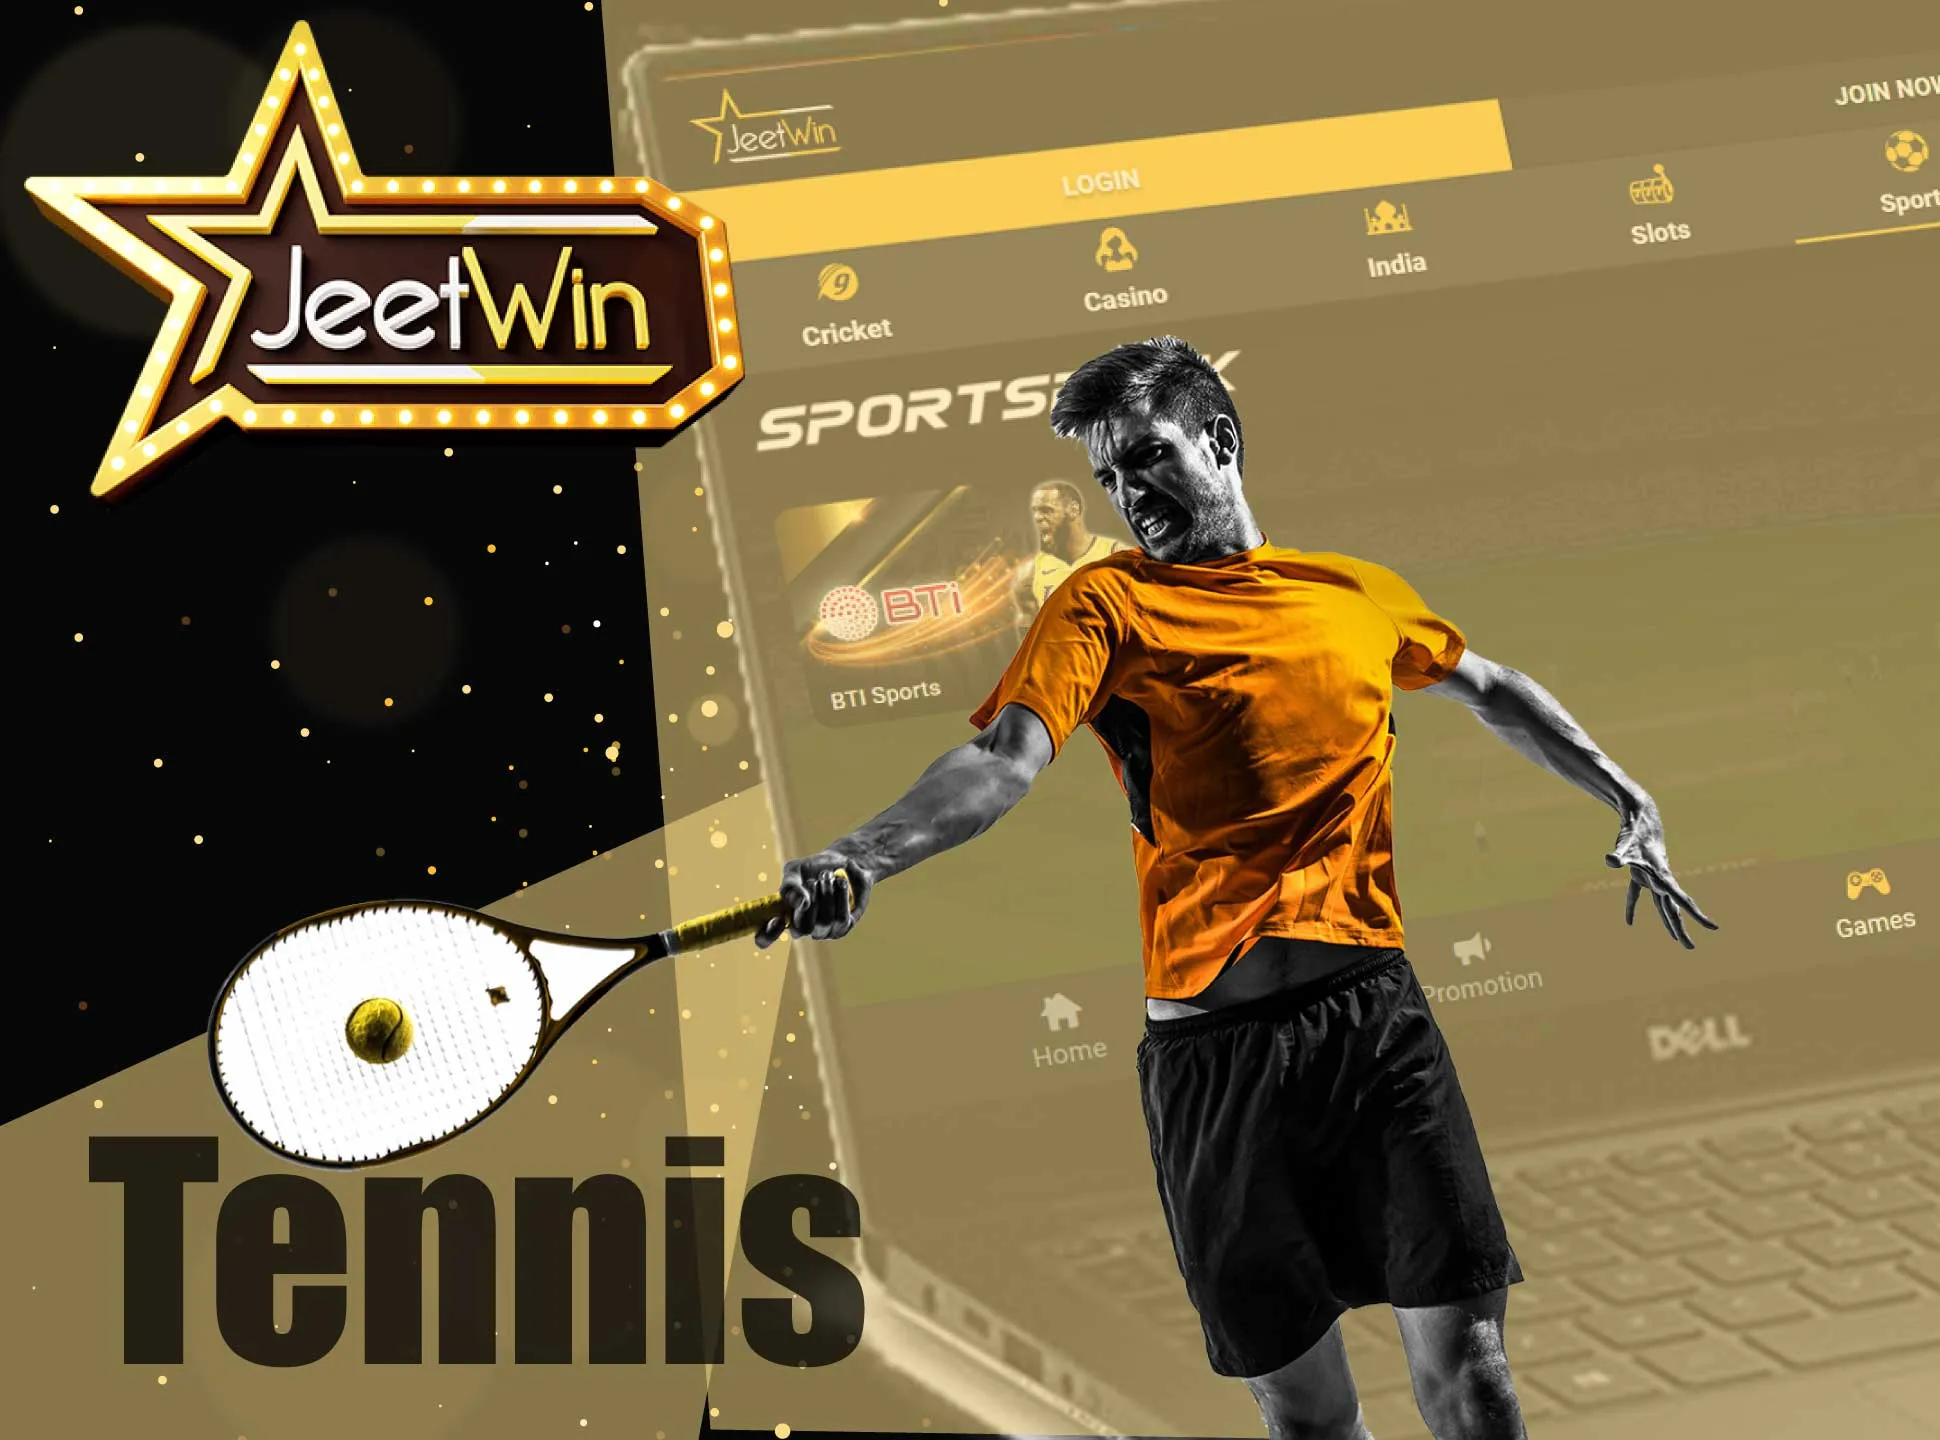 Choose a tennis player and bet on his win.